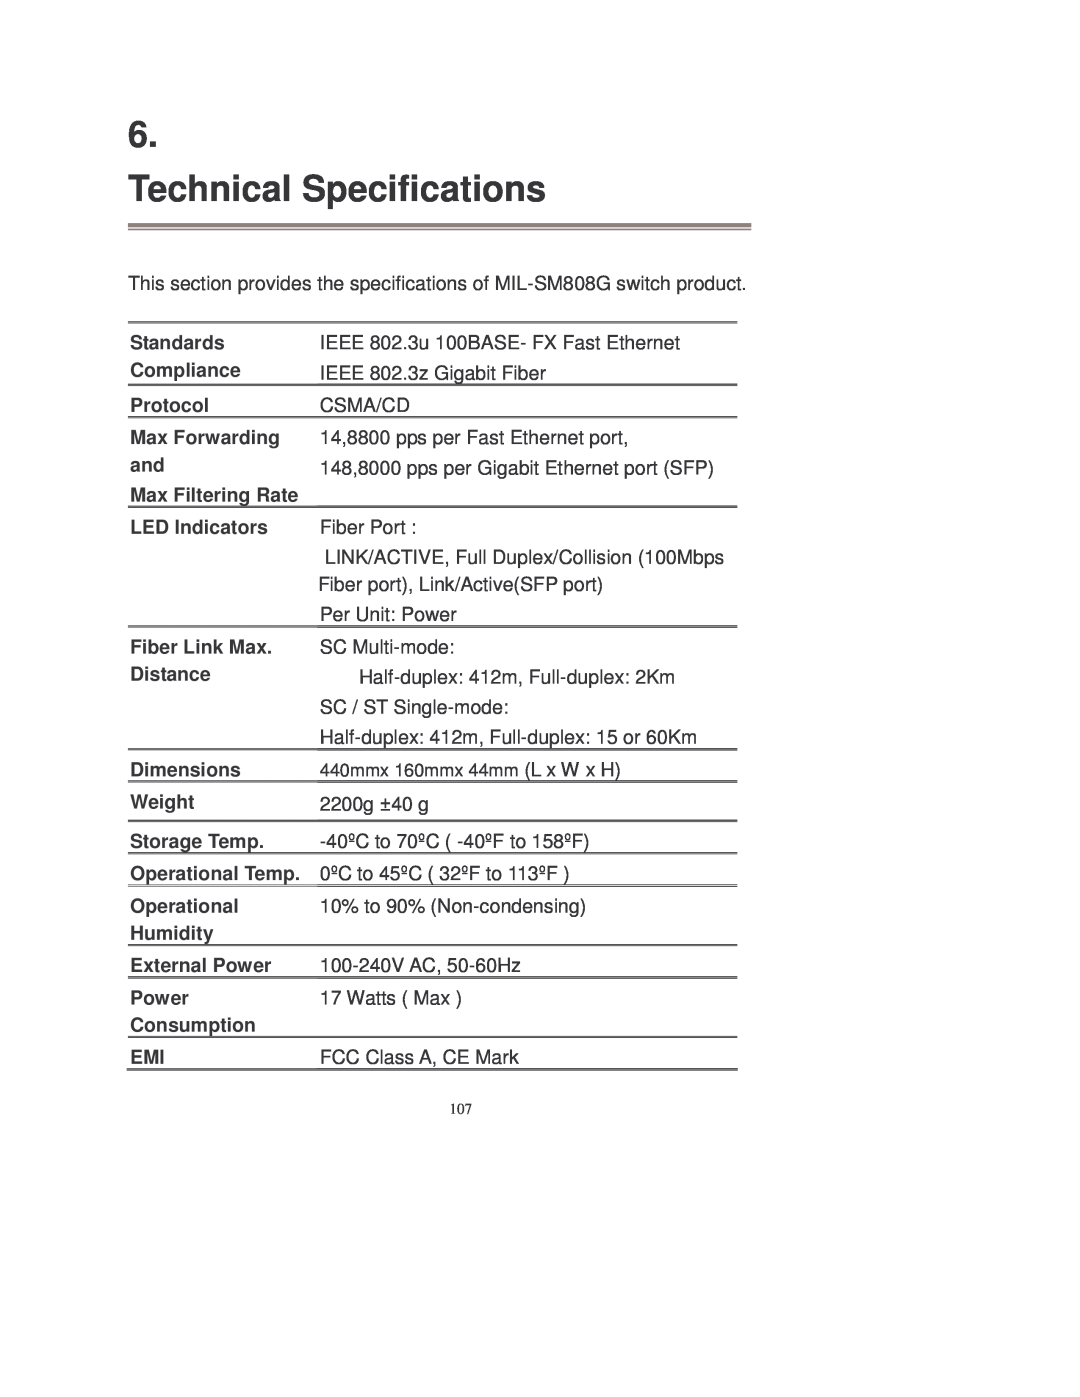 Transition Networks MIL-SM808GPXX manual Technical Specifications, 440mmx 160mmx 44mm L x W x H 